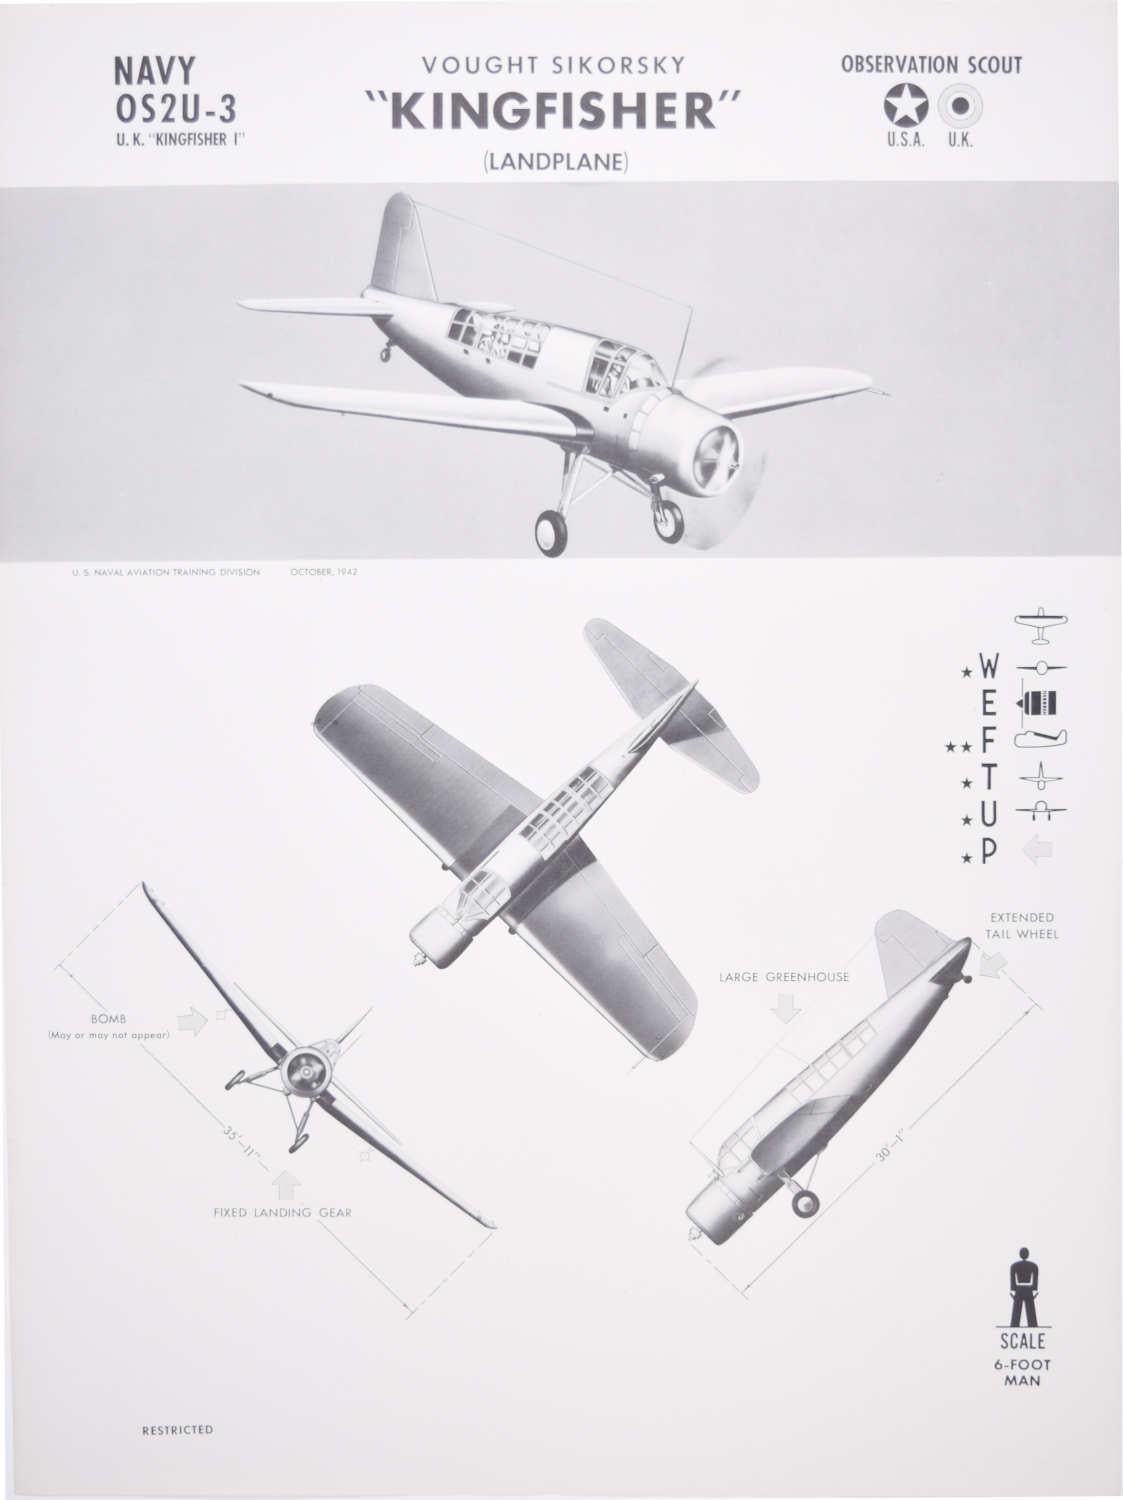 1942 Sikorsky "Kingfisher" observation scout landplane identification poster WW2 - Print by Unknown